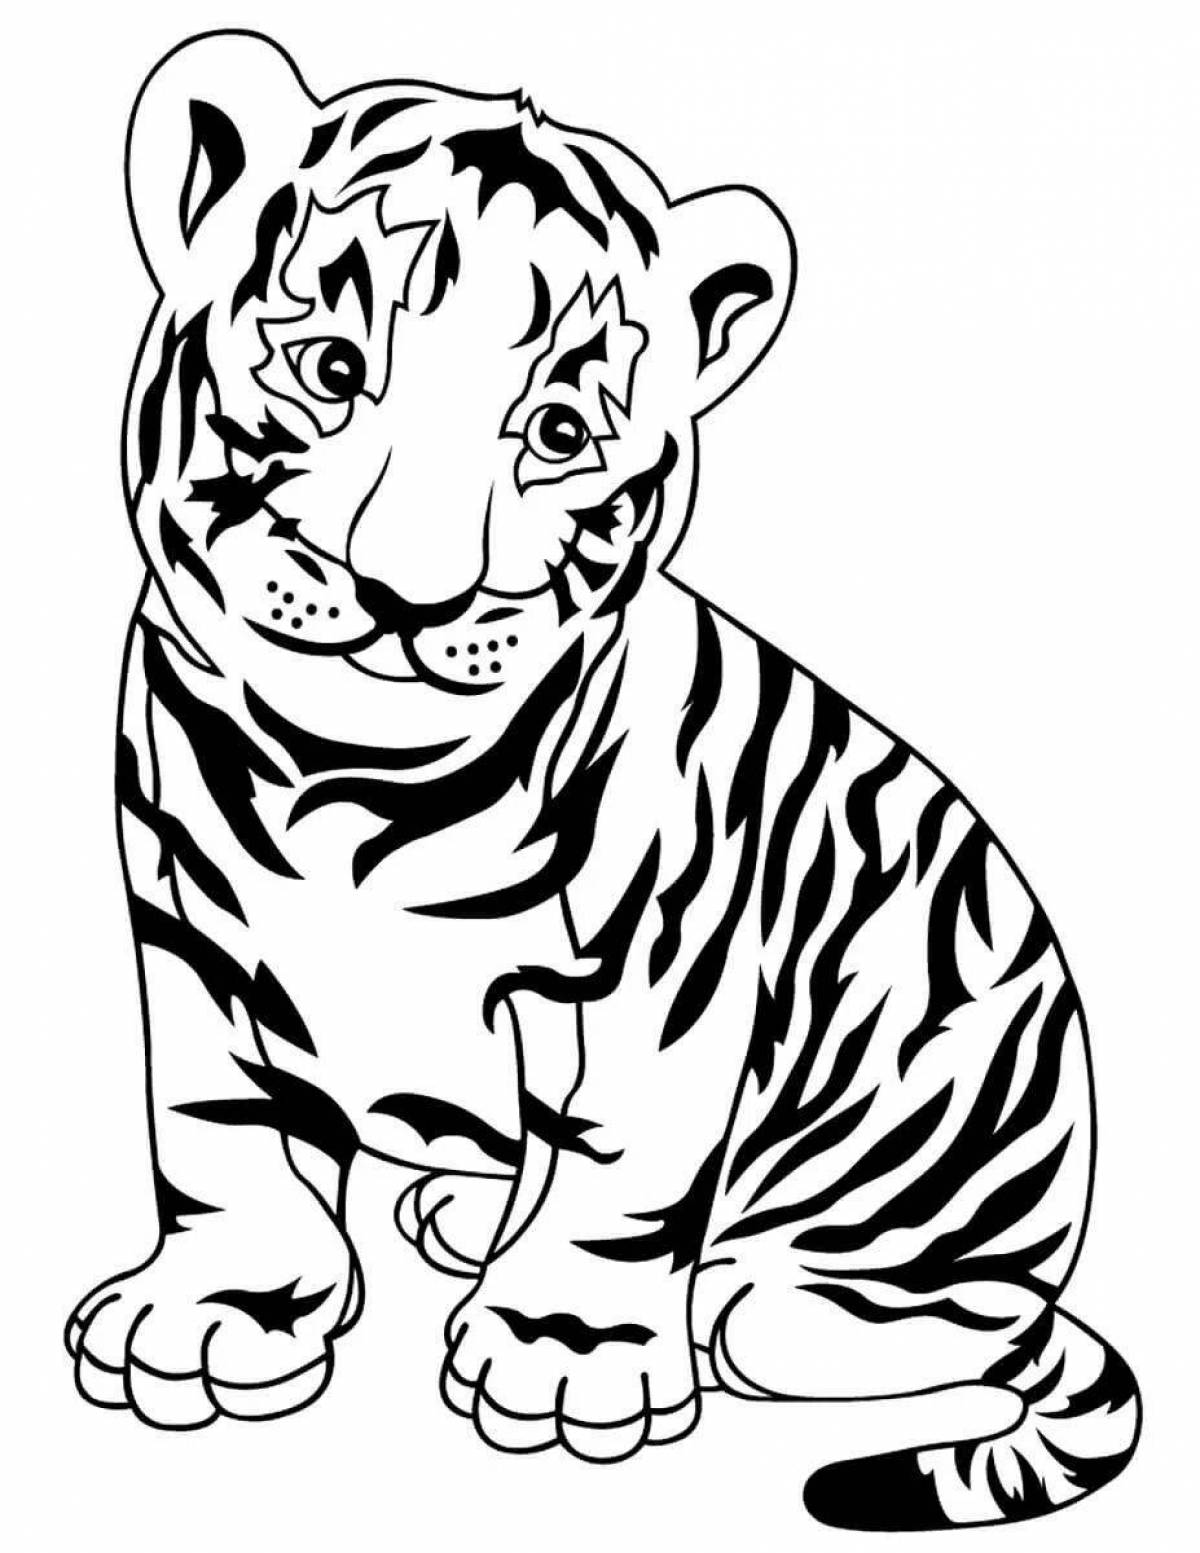 Tiger drawing for kids #1